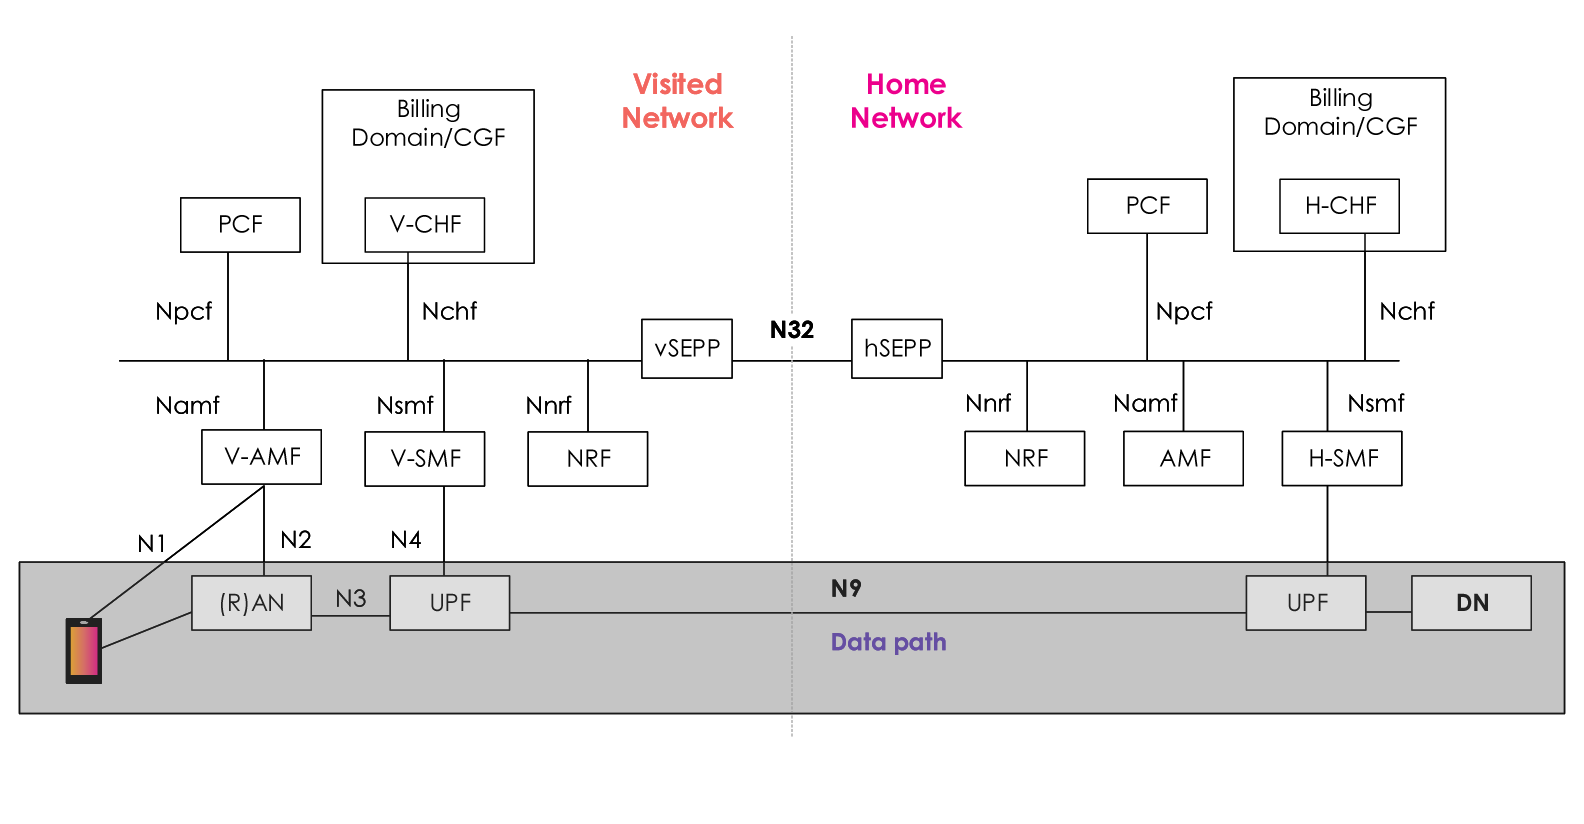 Fig 2 Home Routed Roaming Architecture